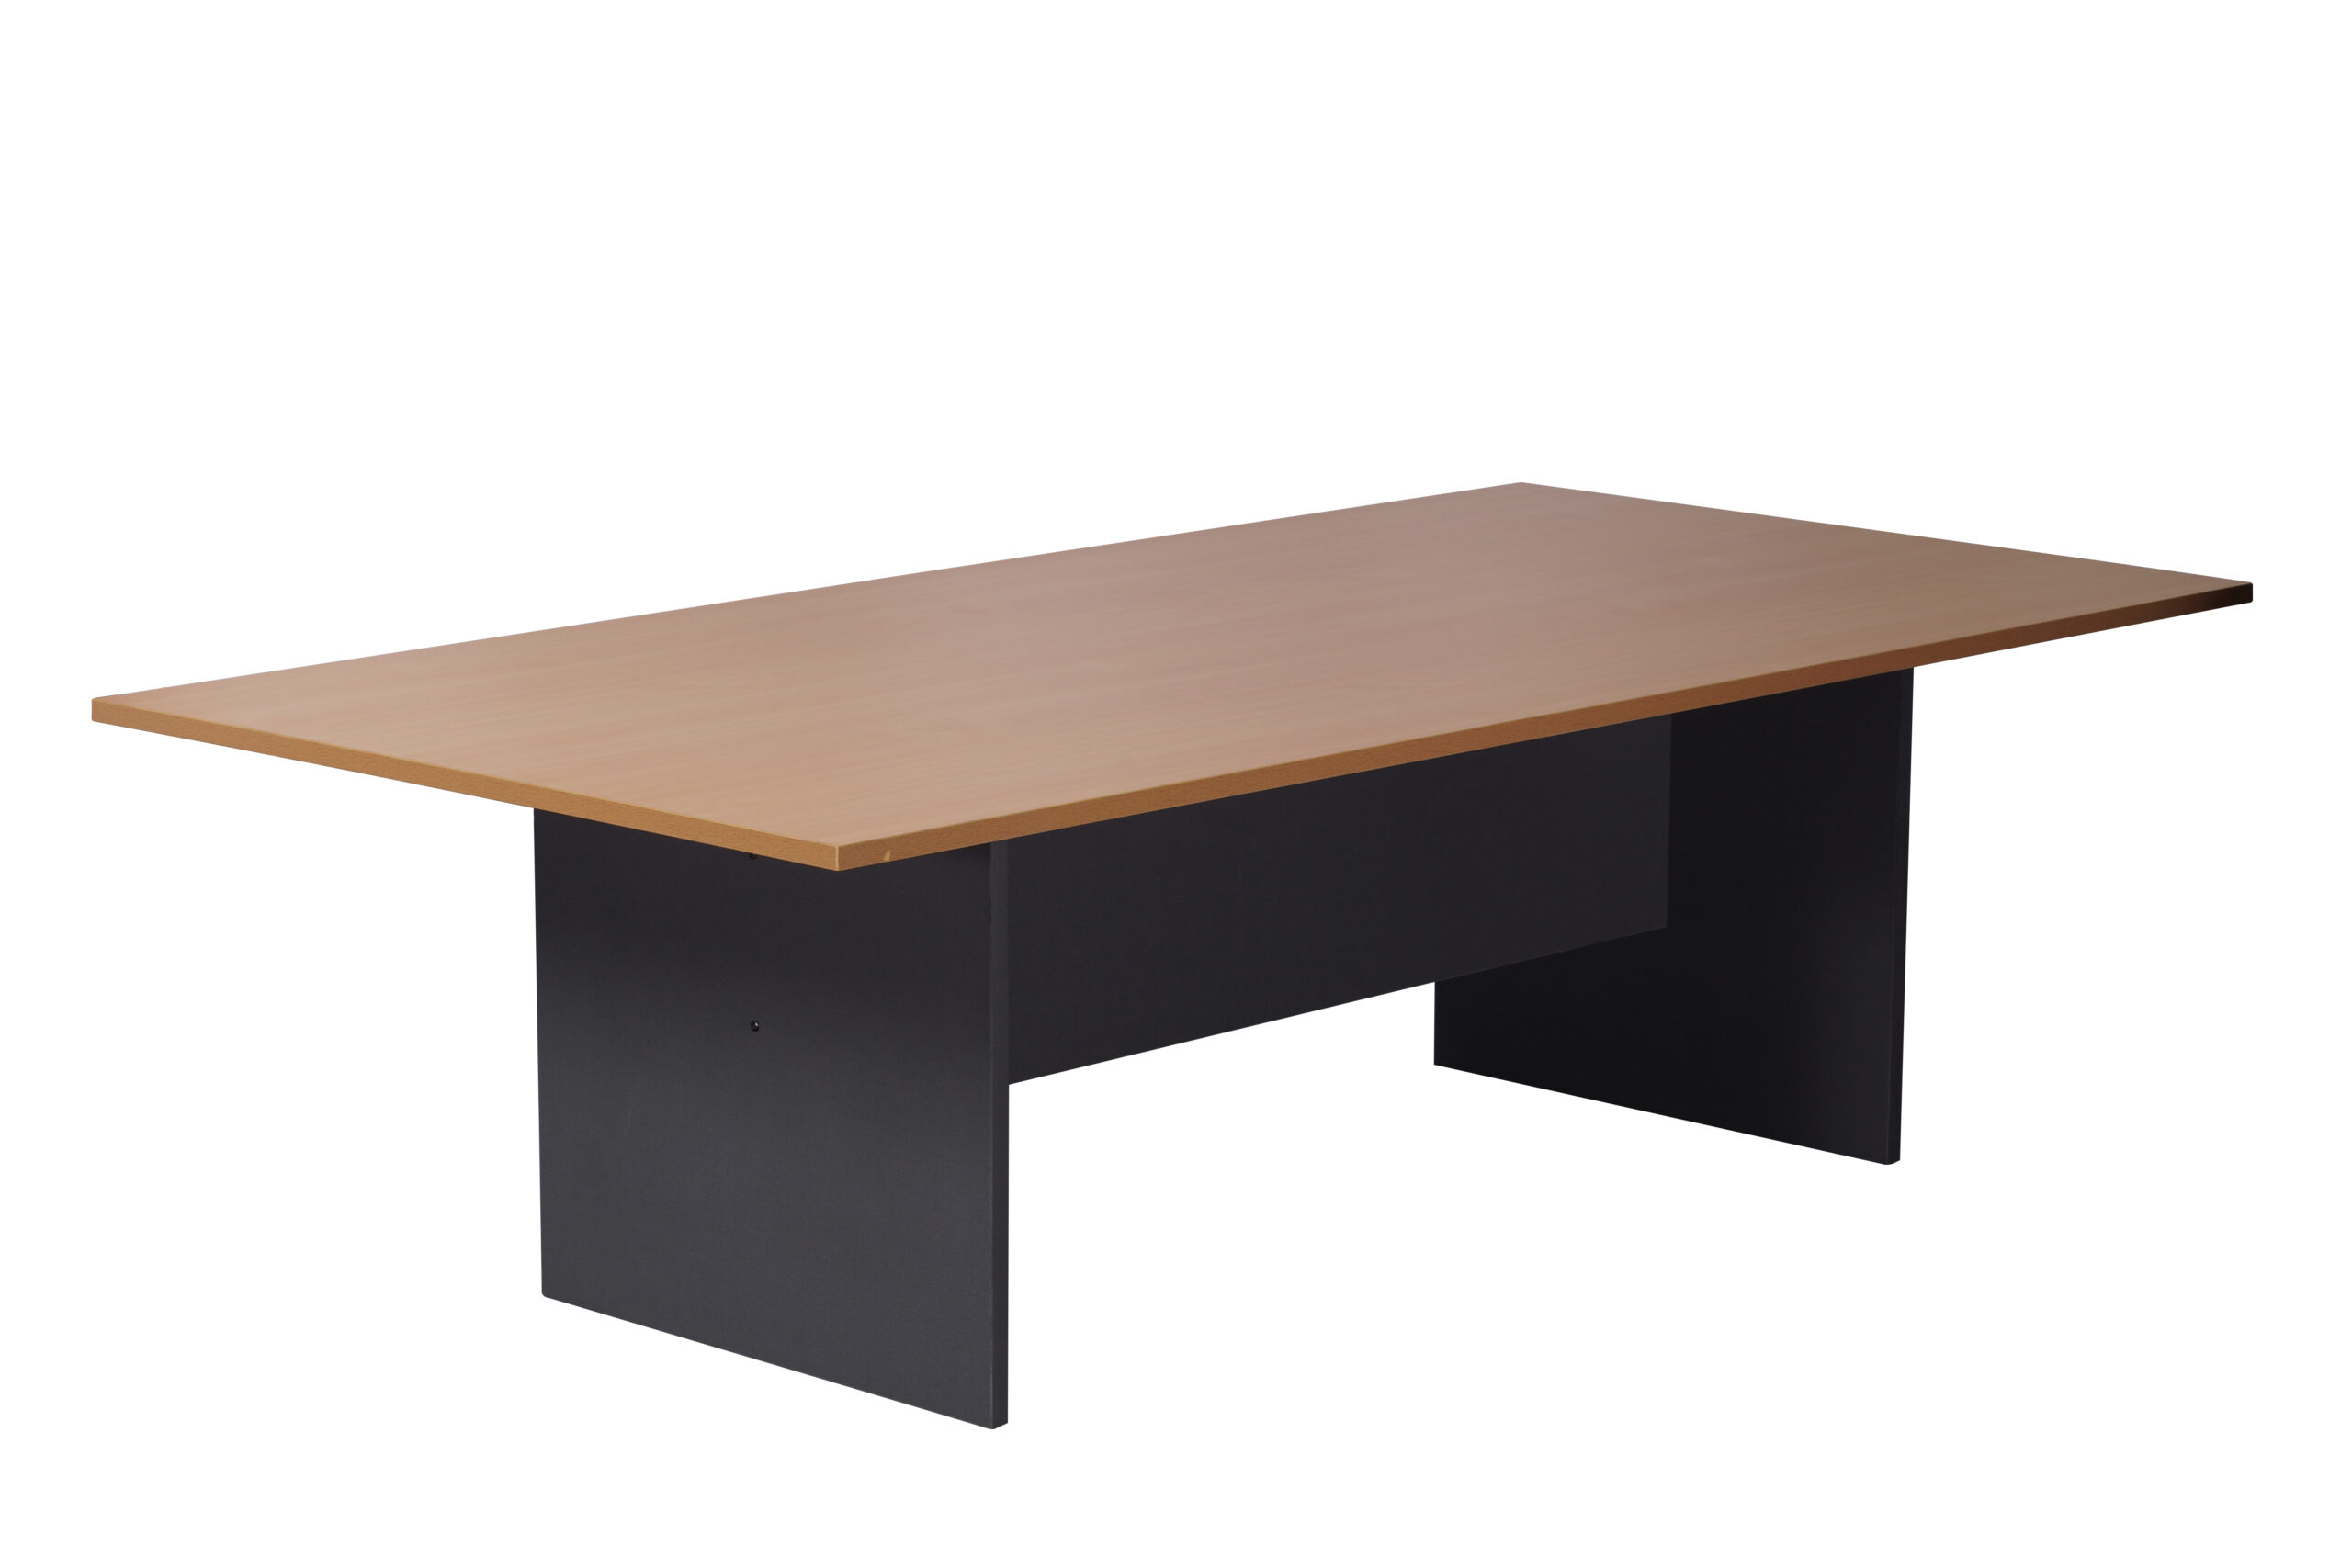 Ironstone Base Boardroom Table (1200W x 730H x 2400D)